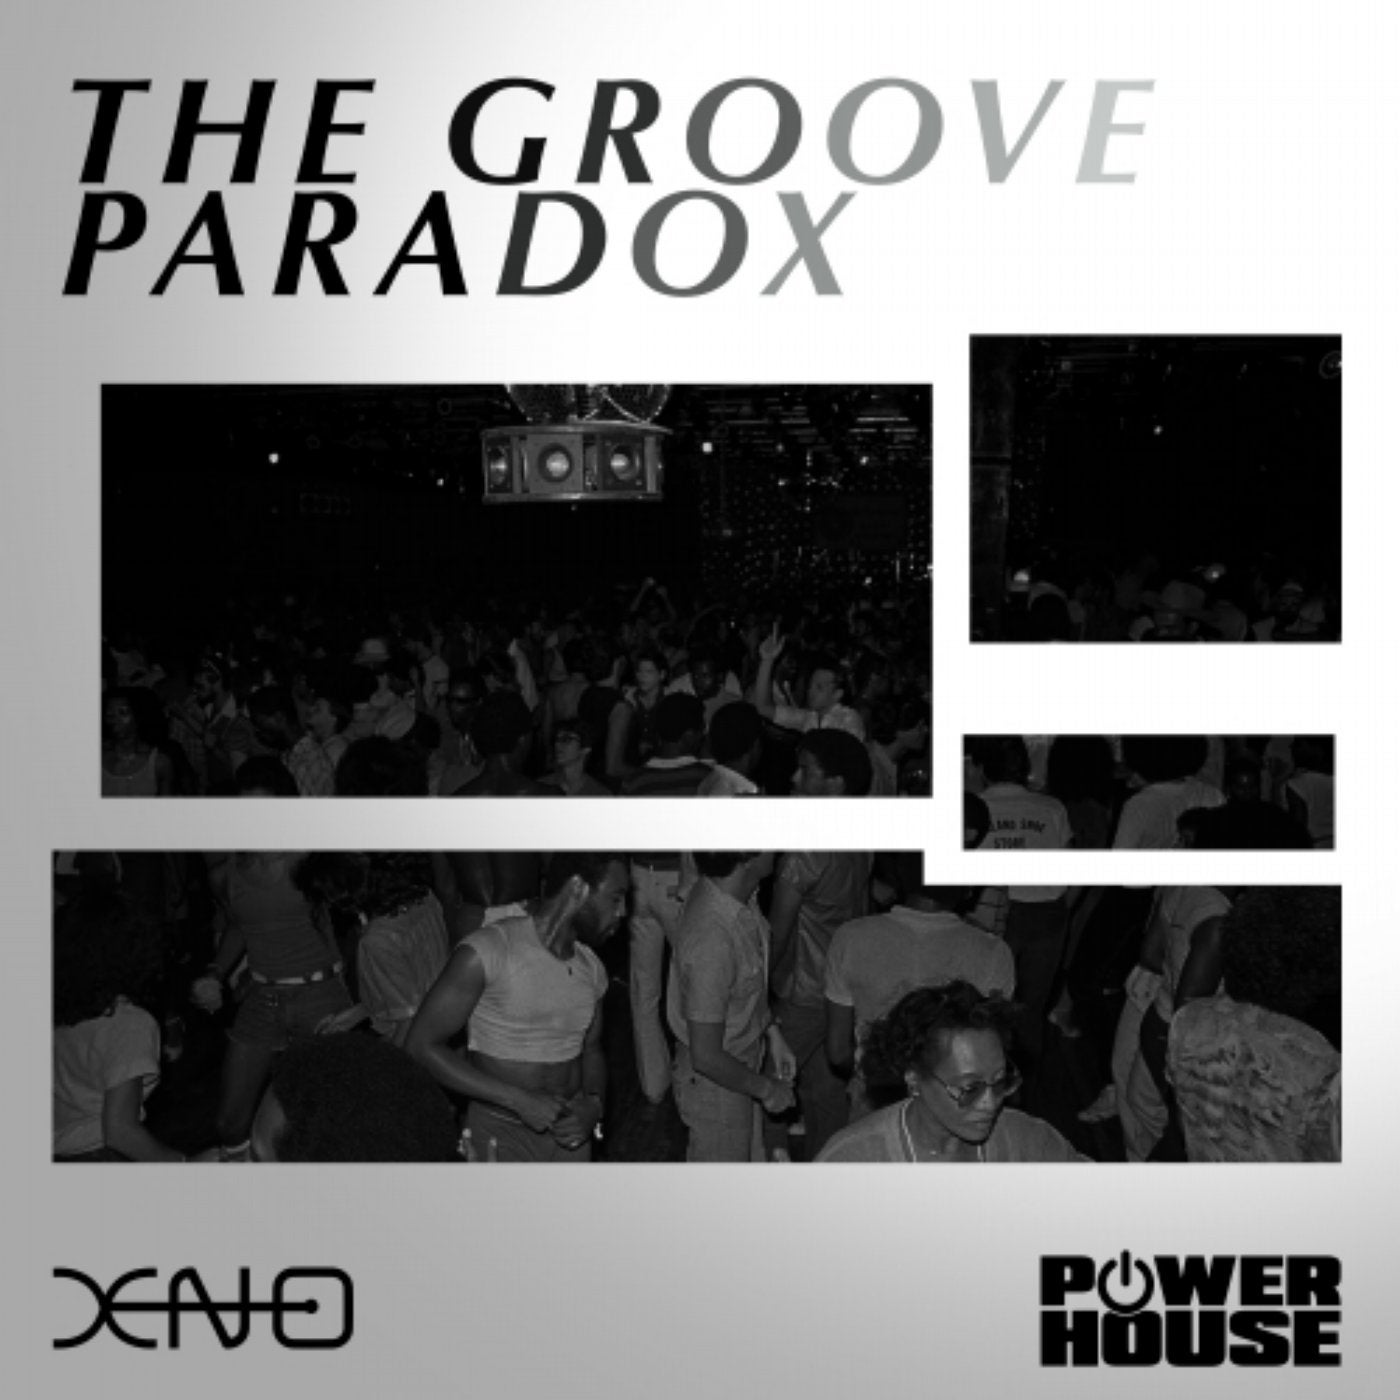 The Groove Paradox